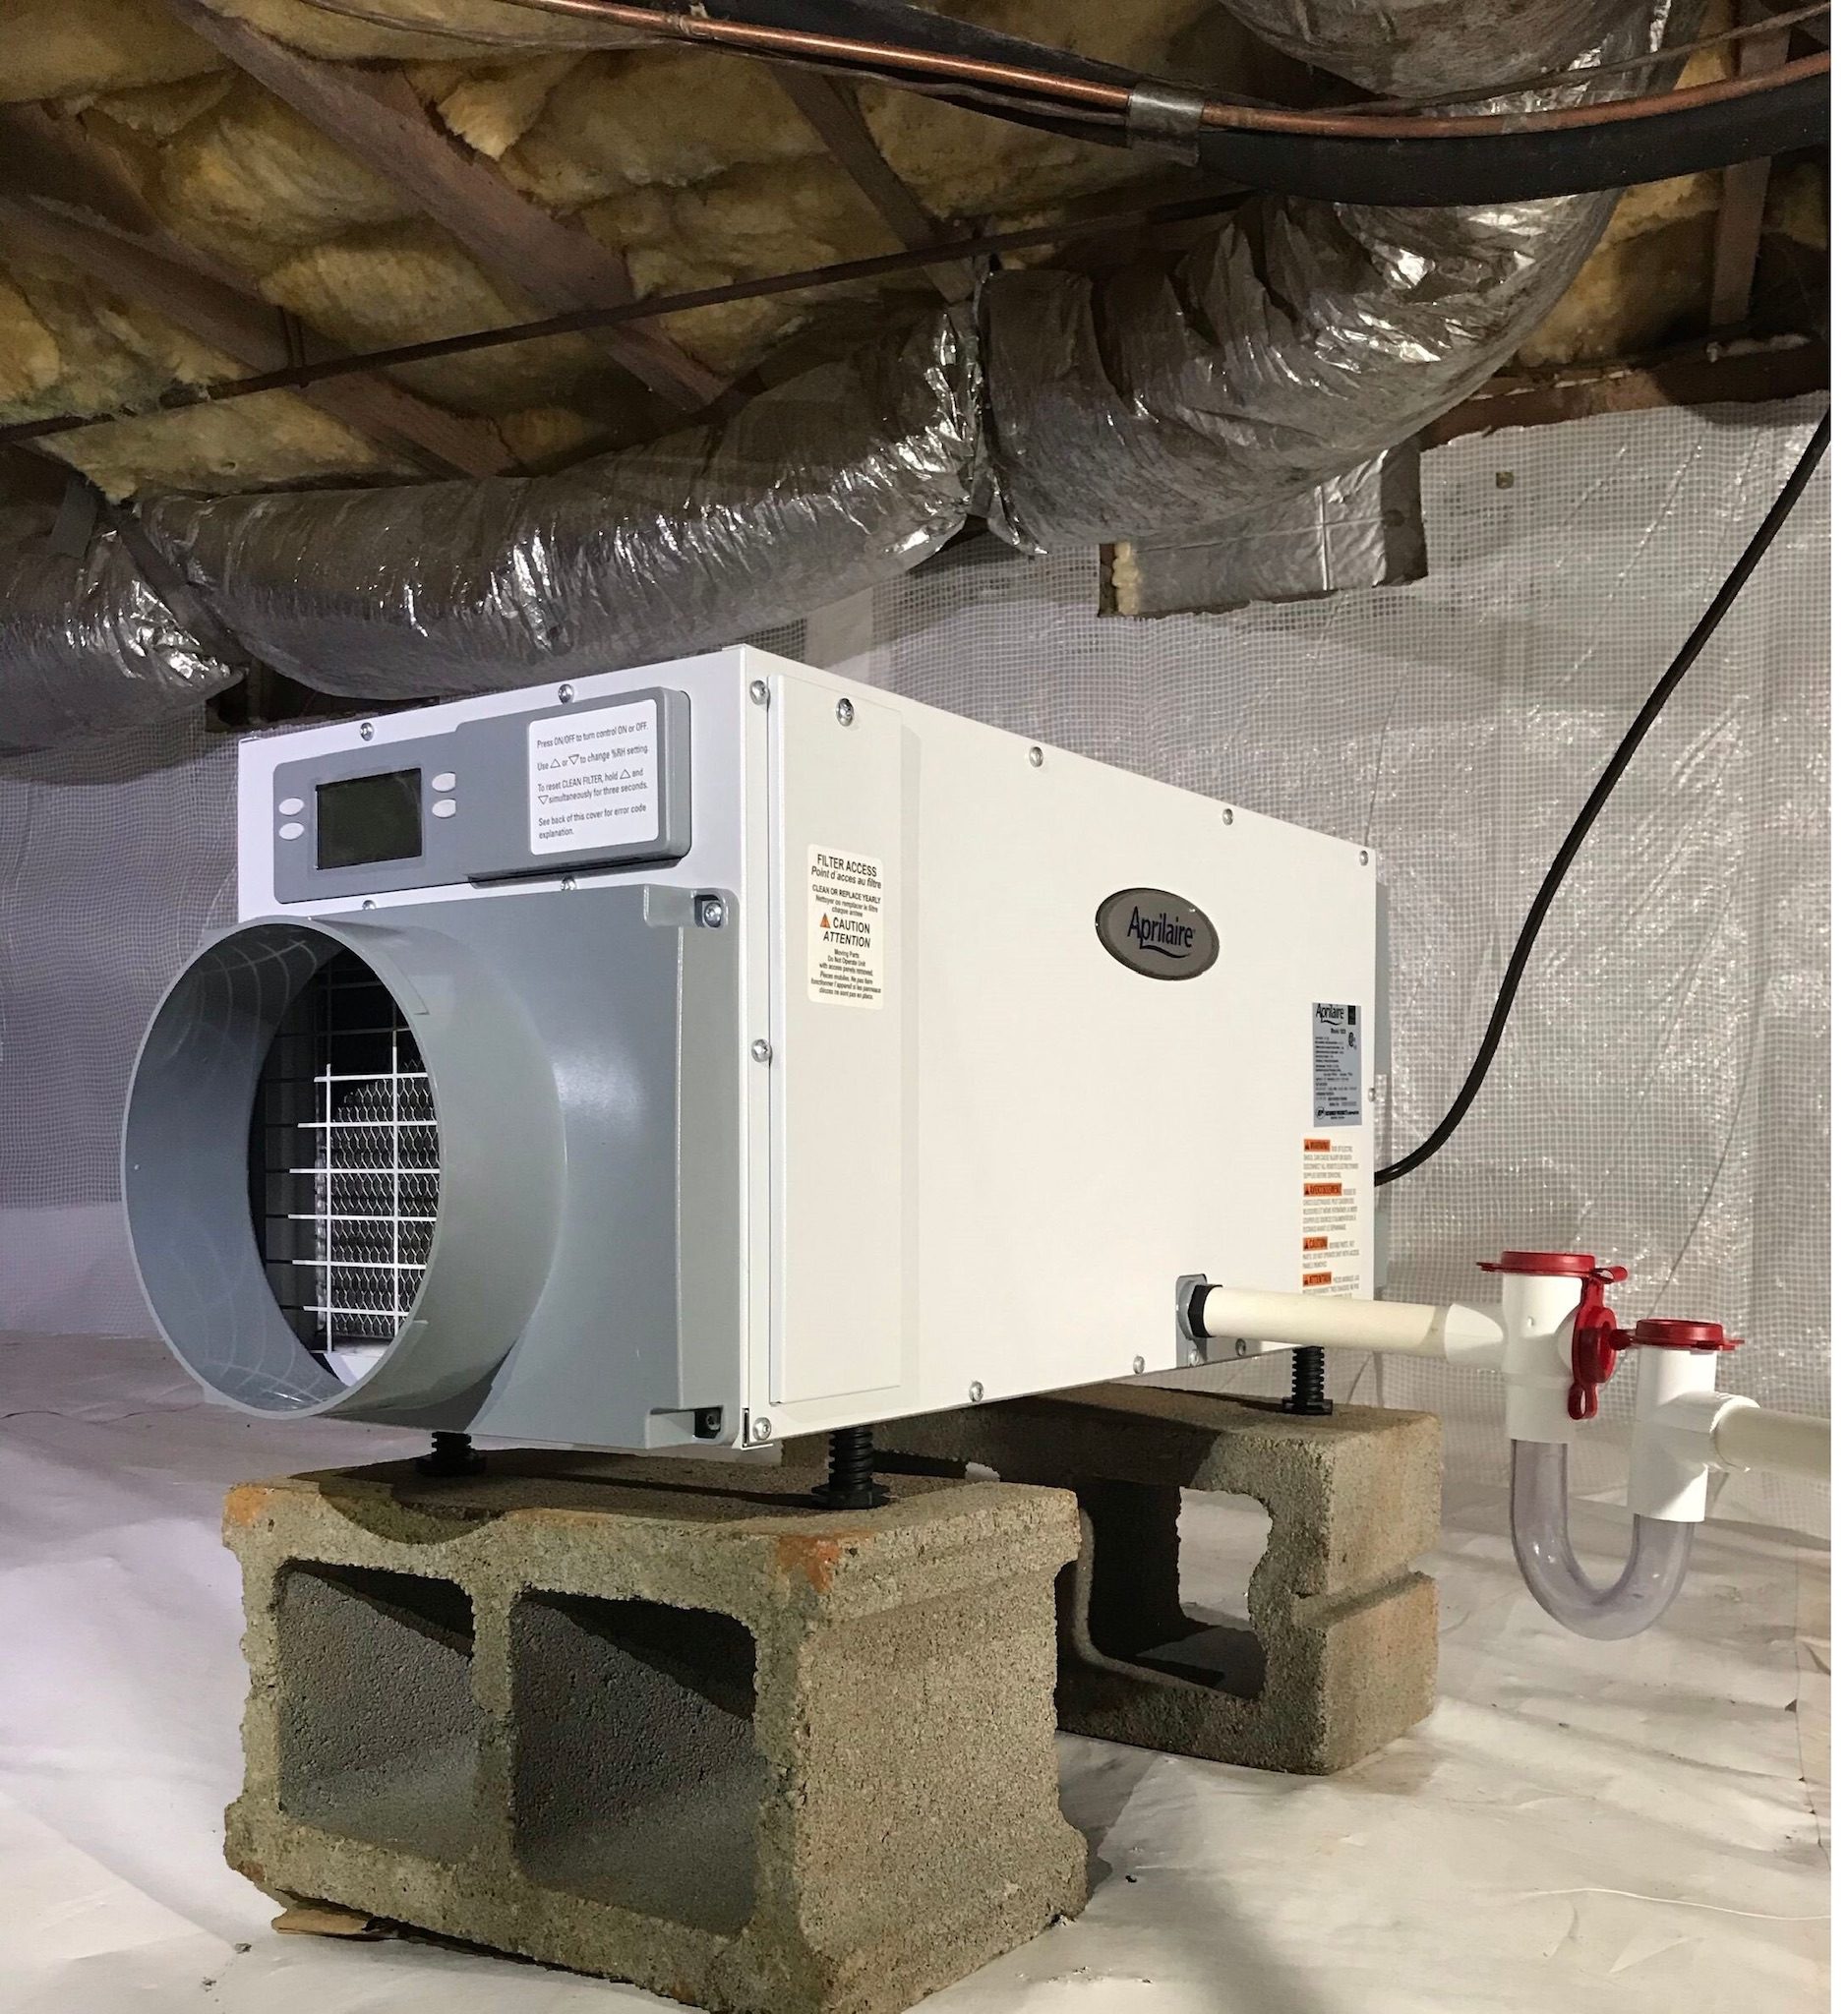 An Aprilaire dehumidifier installed by StayDry Waterproofing in a customer's crawl space.